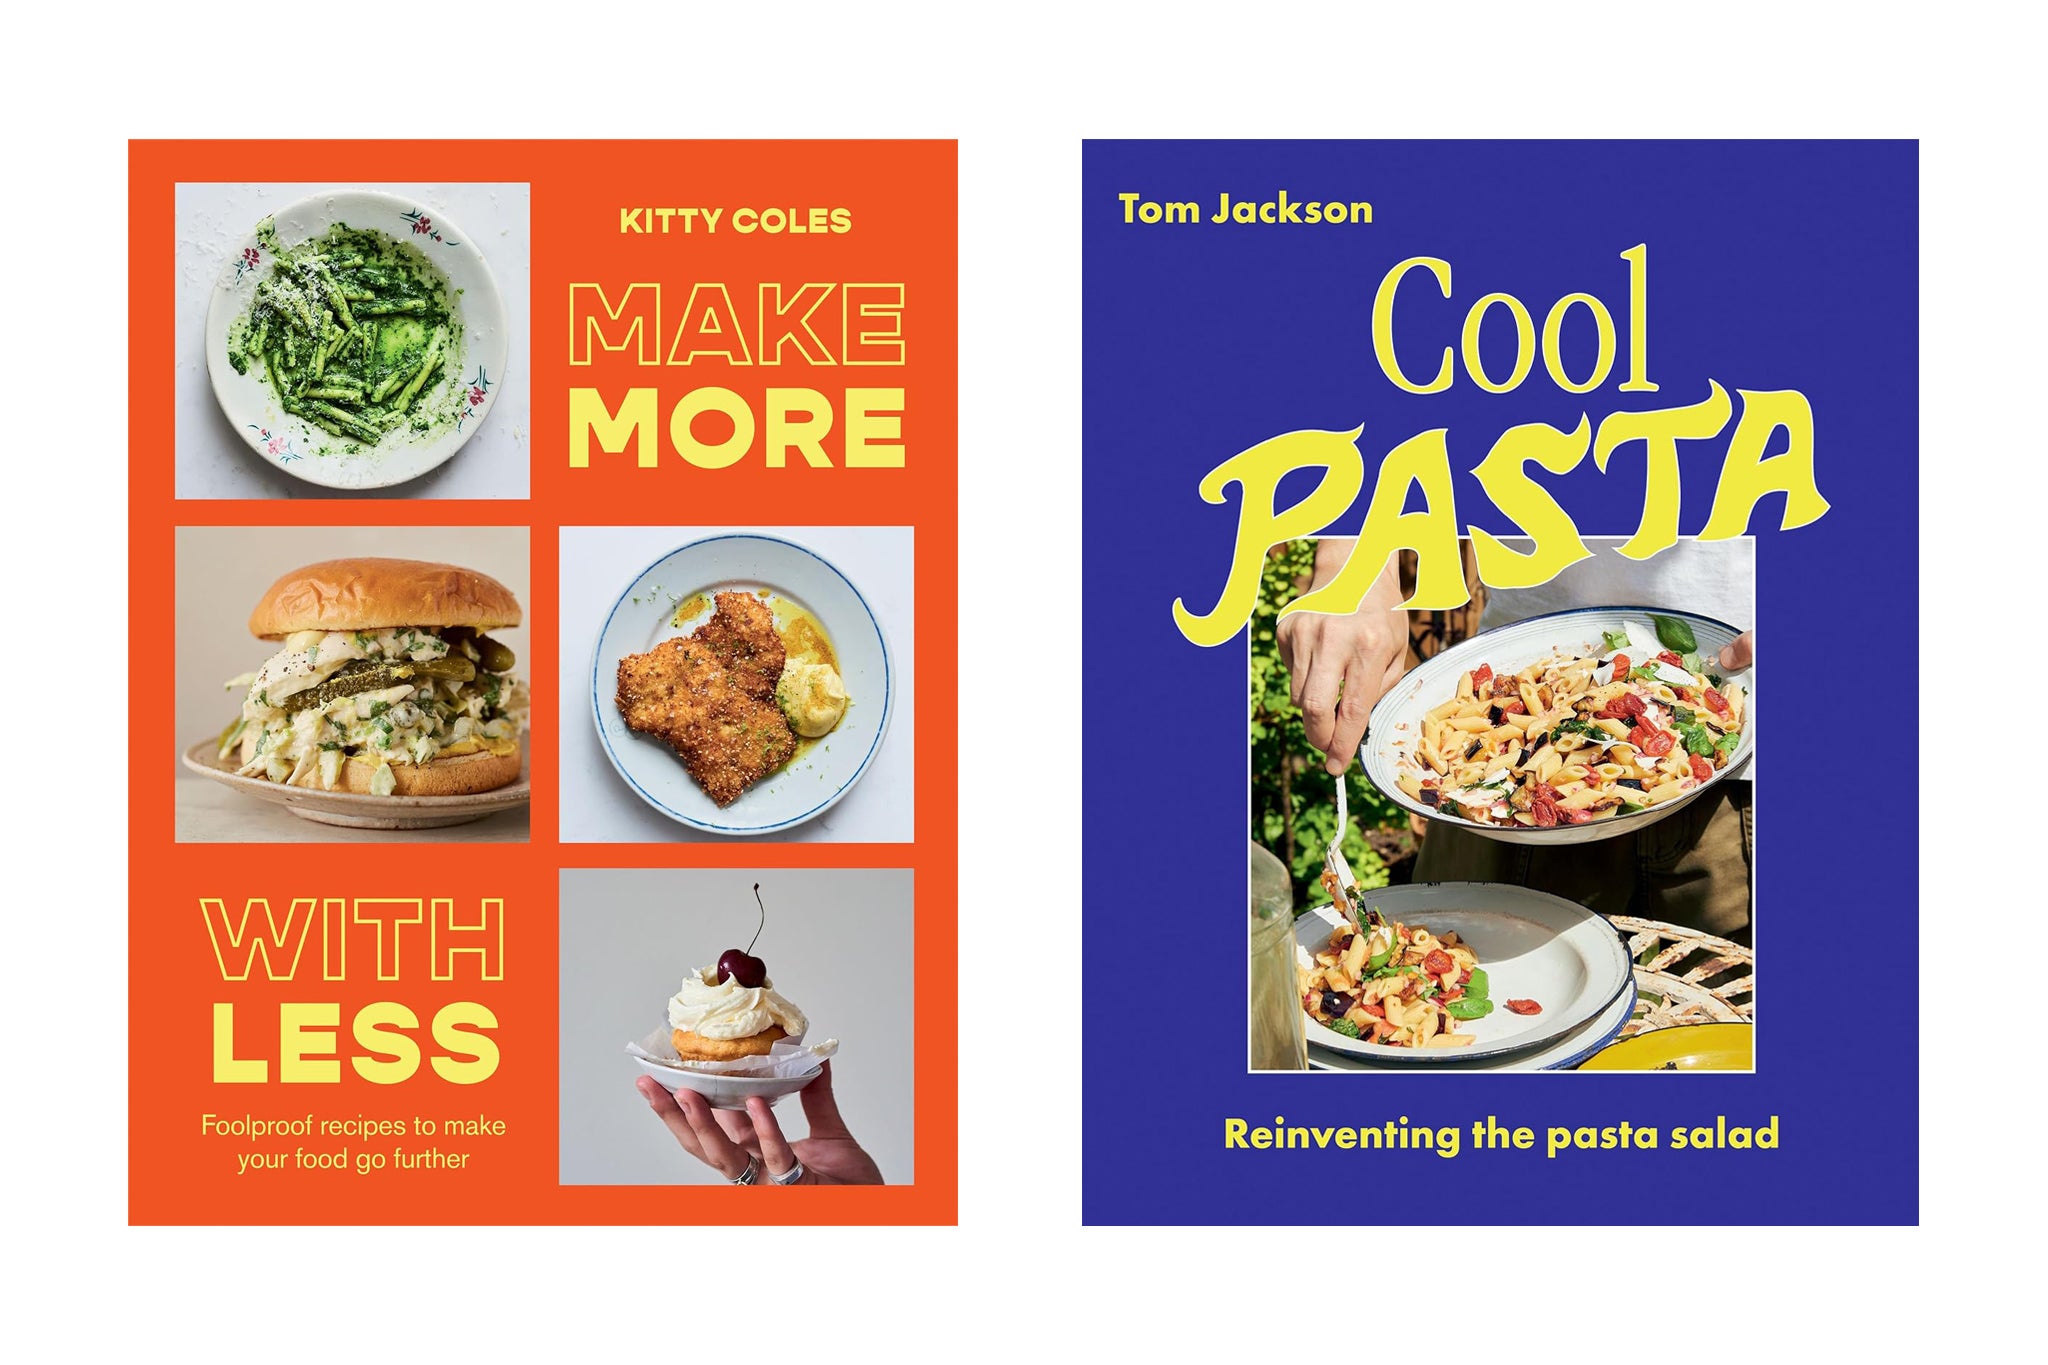 Kitty Coles’s ‘Make More with Less’ and Tom Jackson’s ‘Cool Pasta’ are among the cookbooks that have hit shelves in recent months